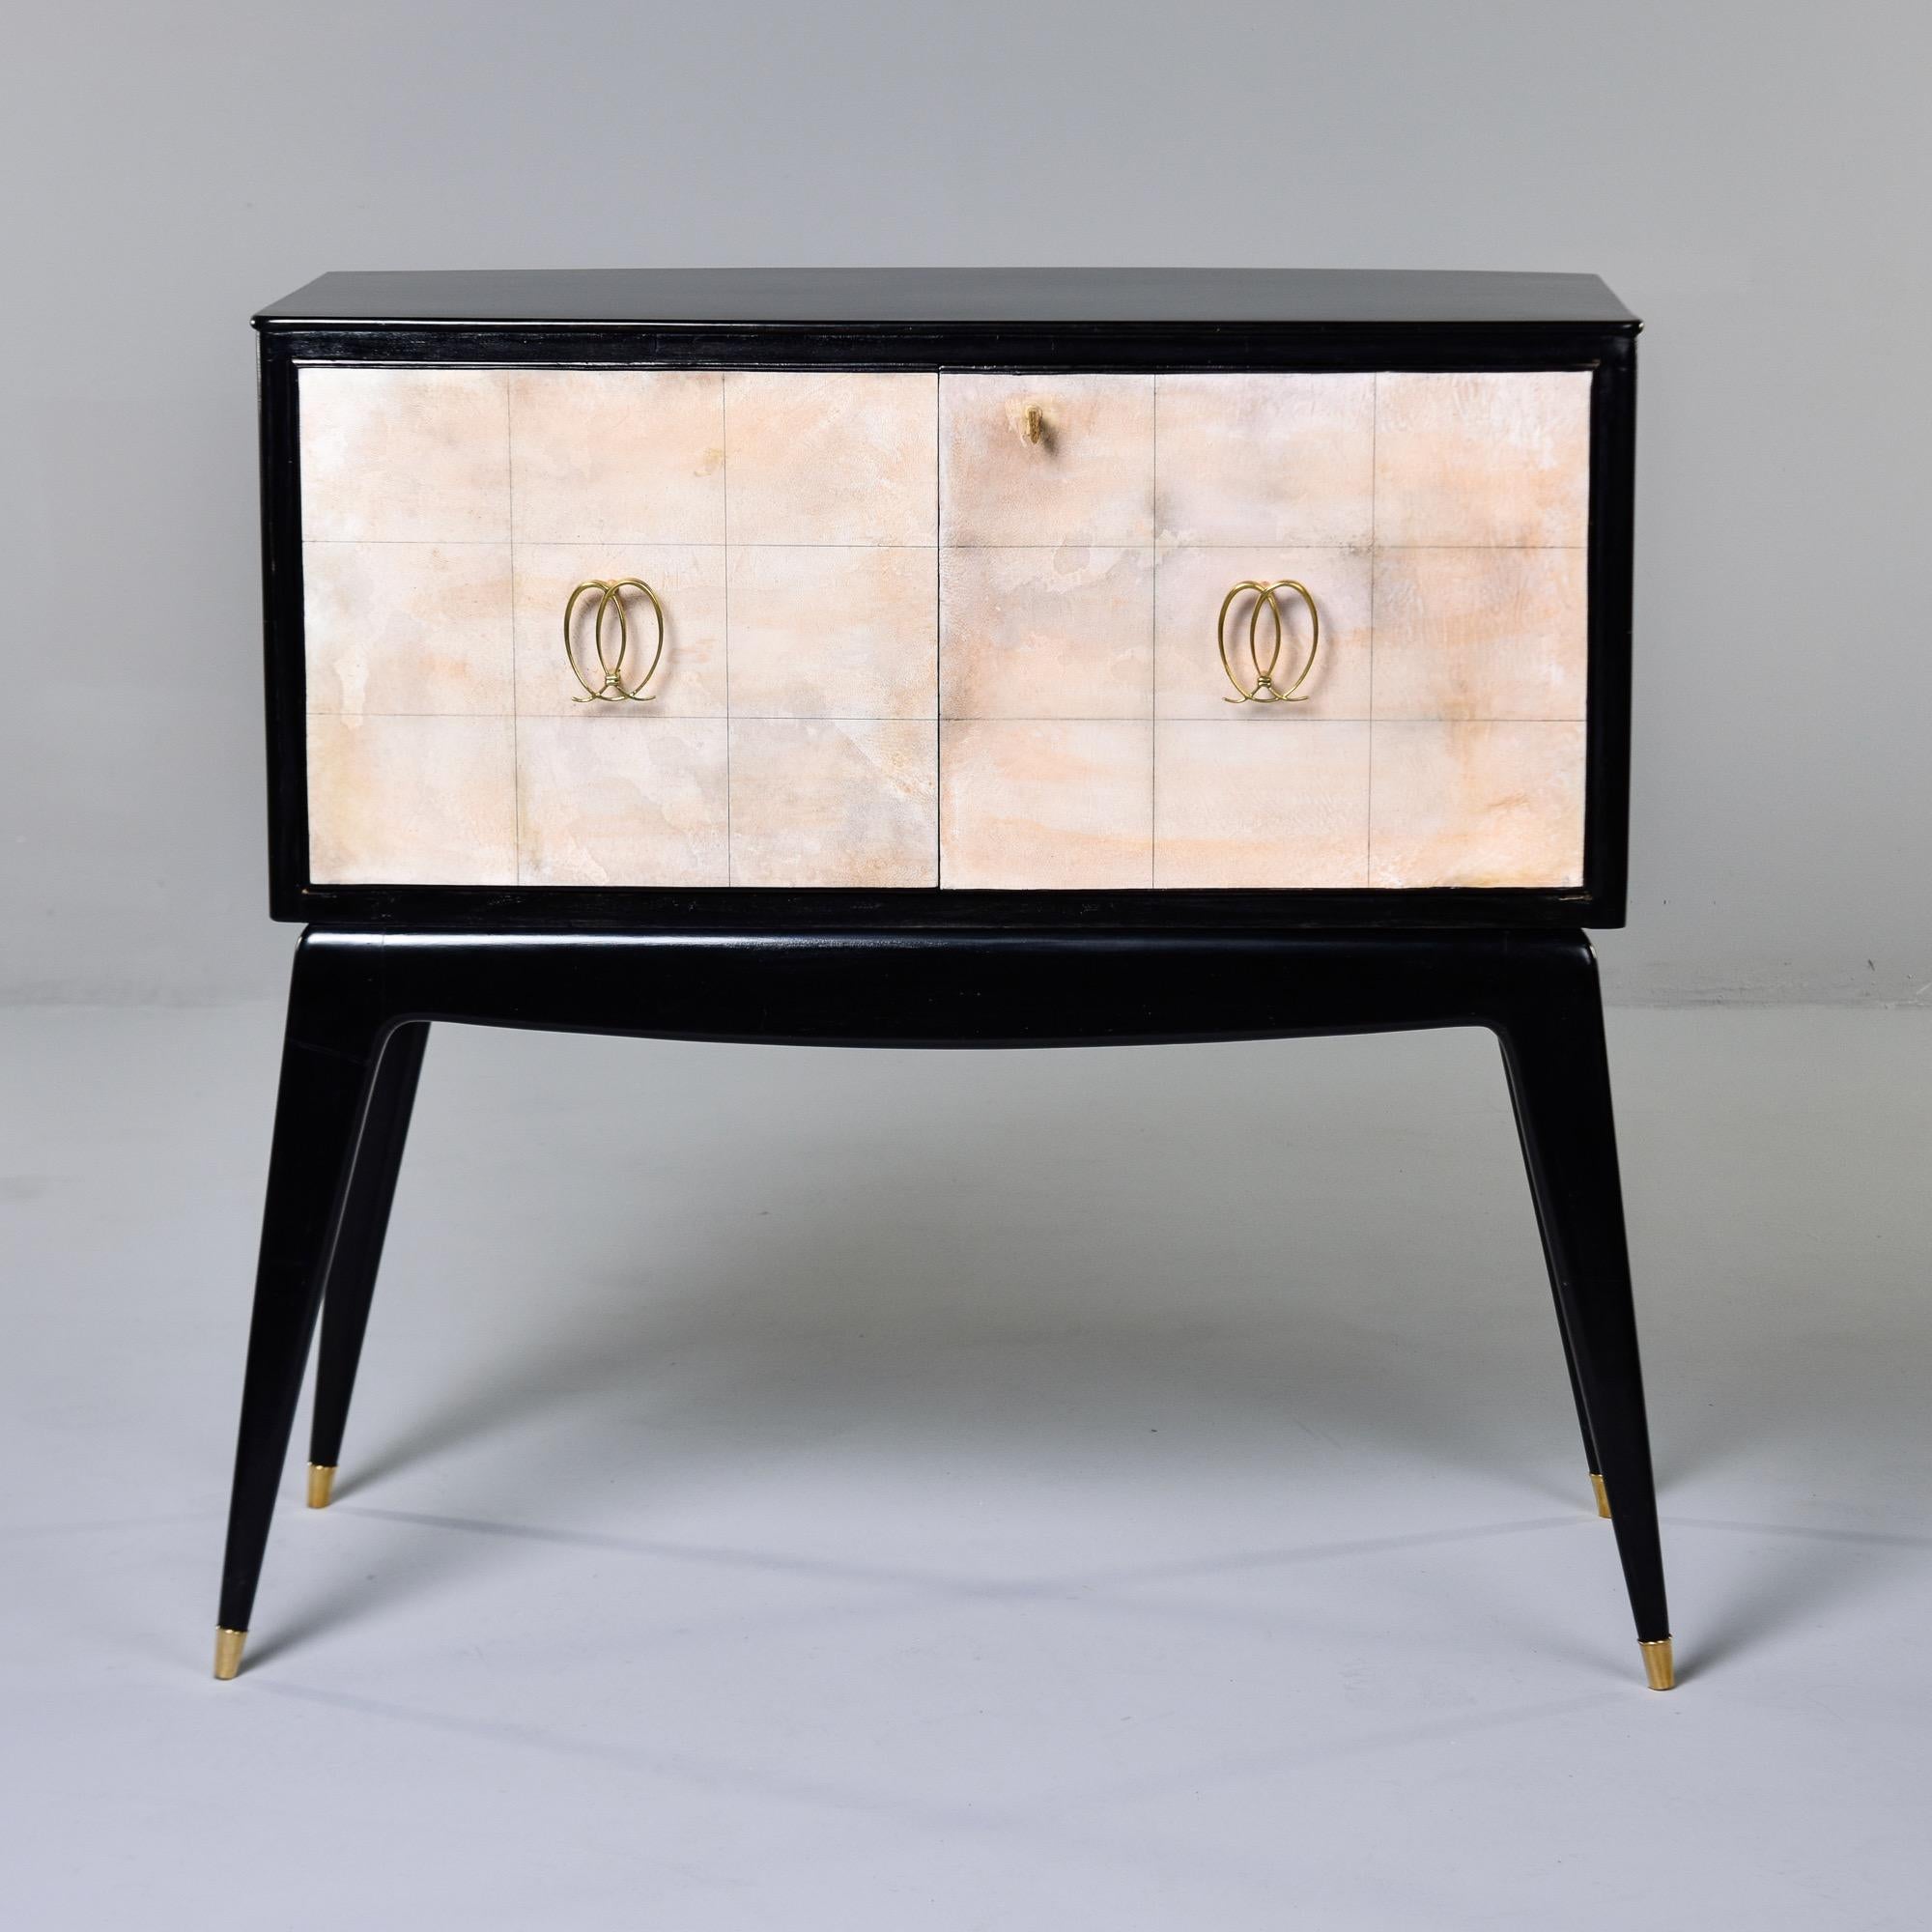 Found in Italy, this mid century Italian bar cabinet has an ebonised body, parchment covered doors with a functional lock and a mirrored interior. Cabinet has original brass hardware, internal bottle racks, checkered mirrored sides, and slim tapered